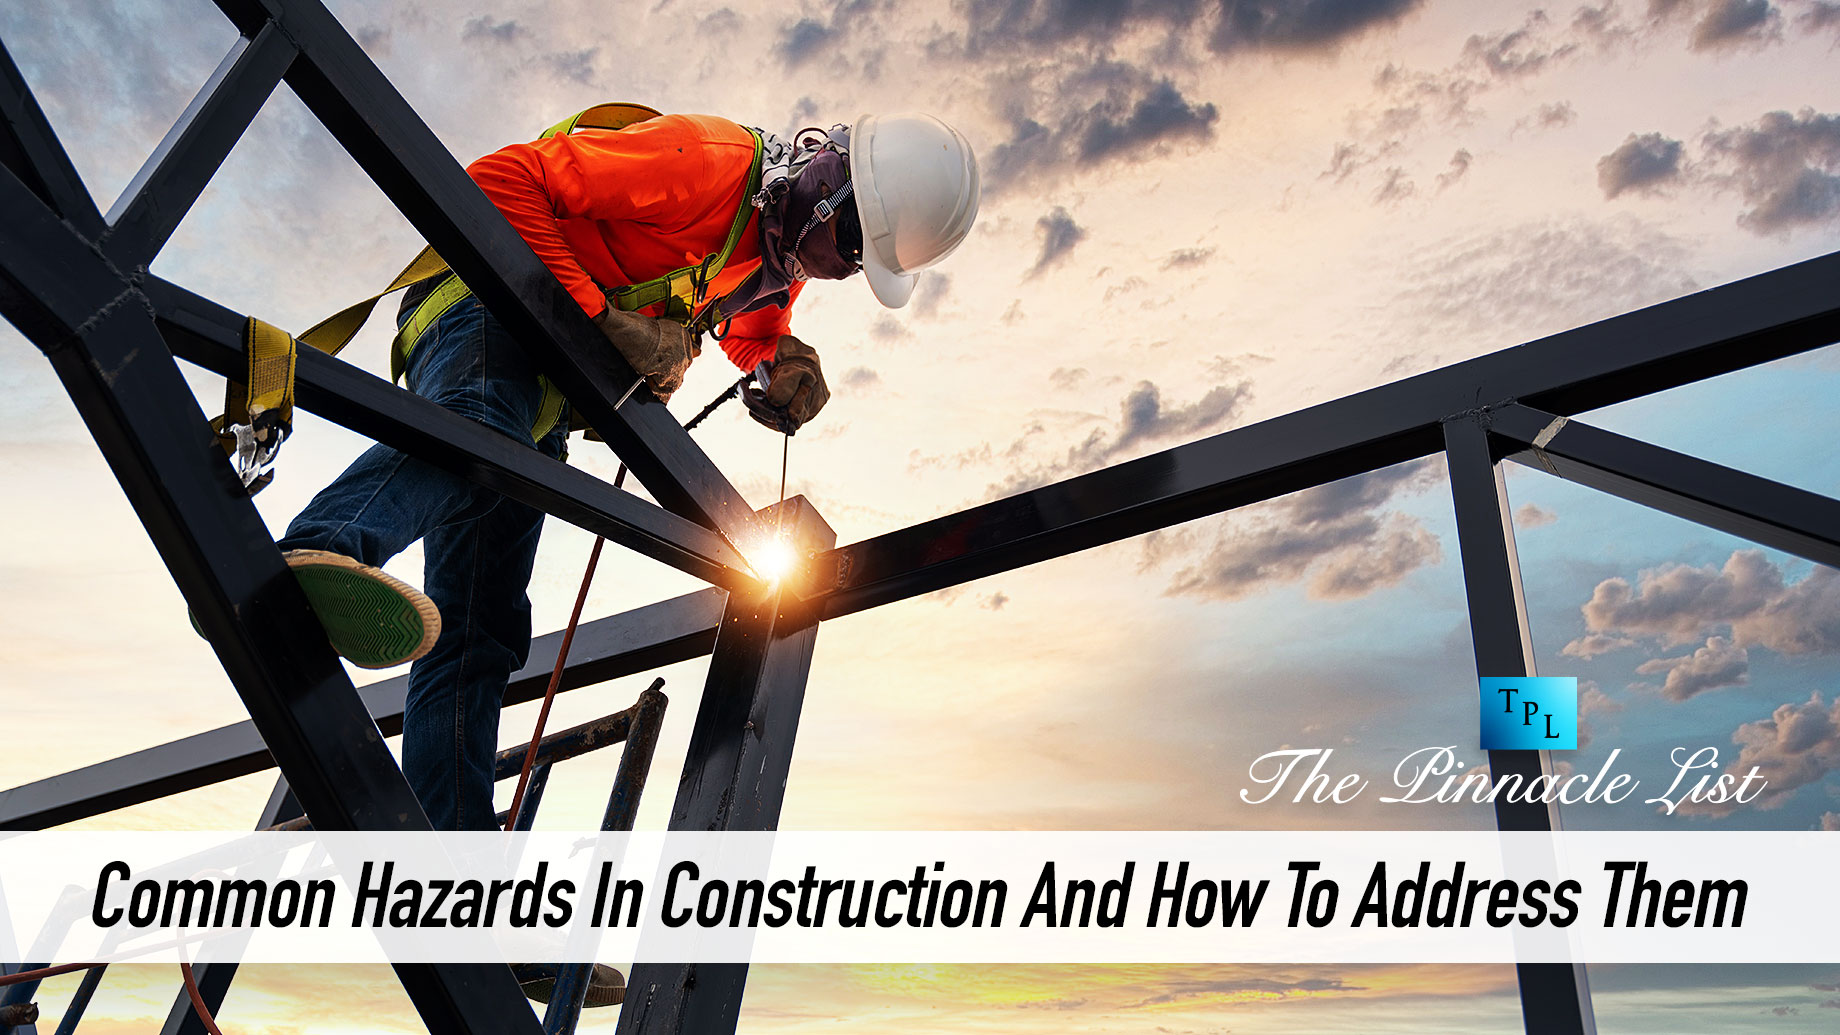 Common Hazards In Construction And How To Address Them